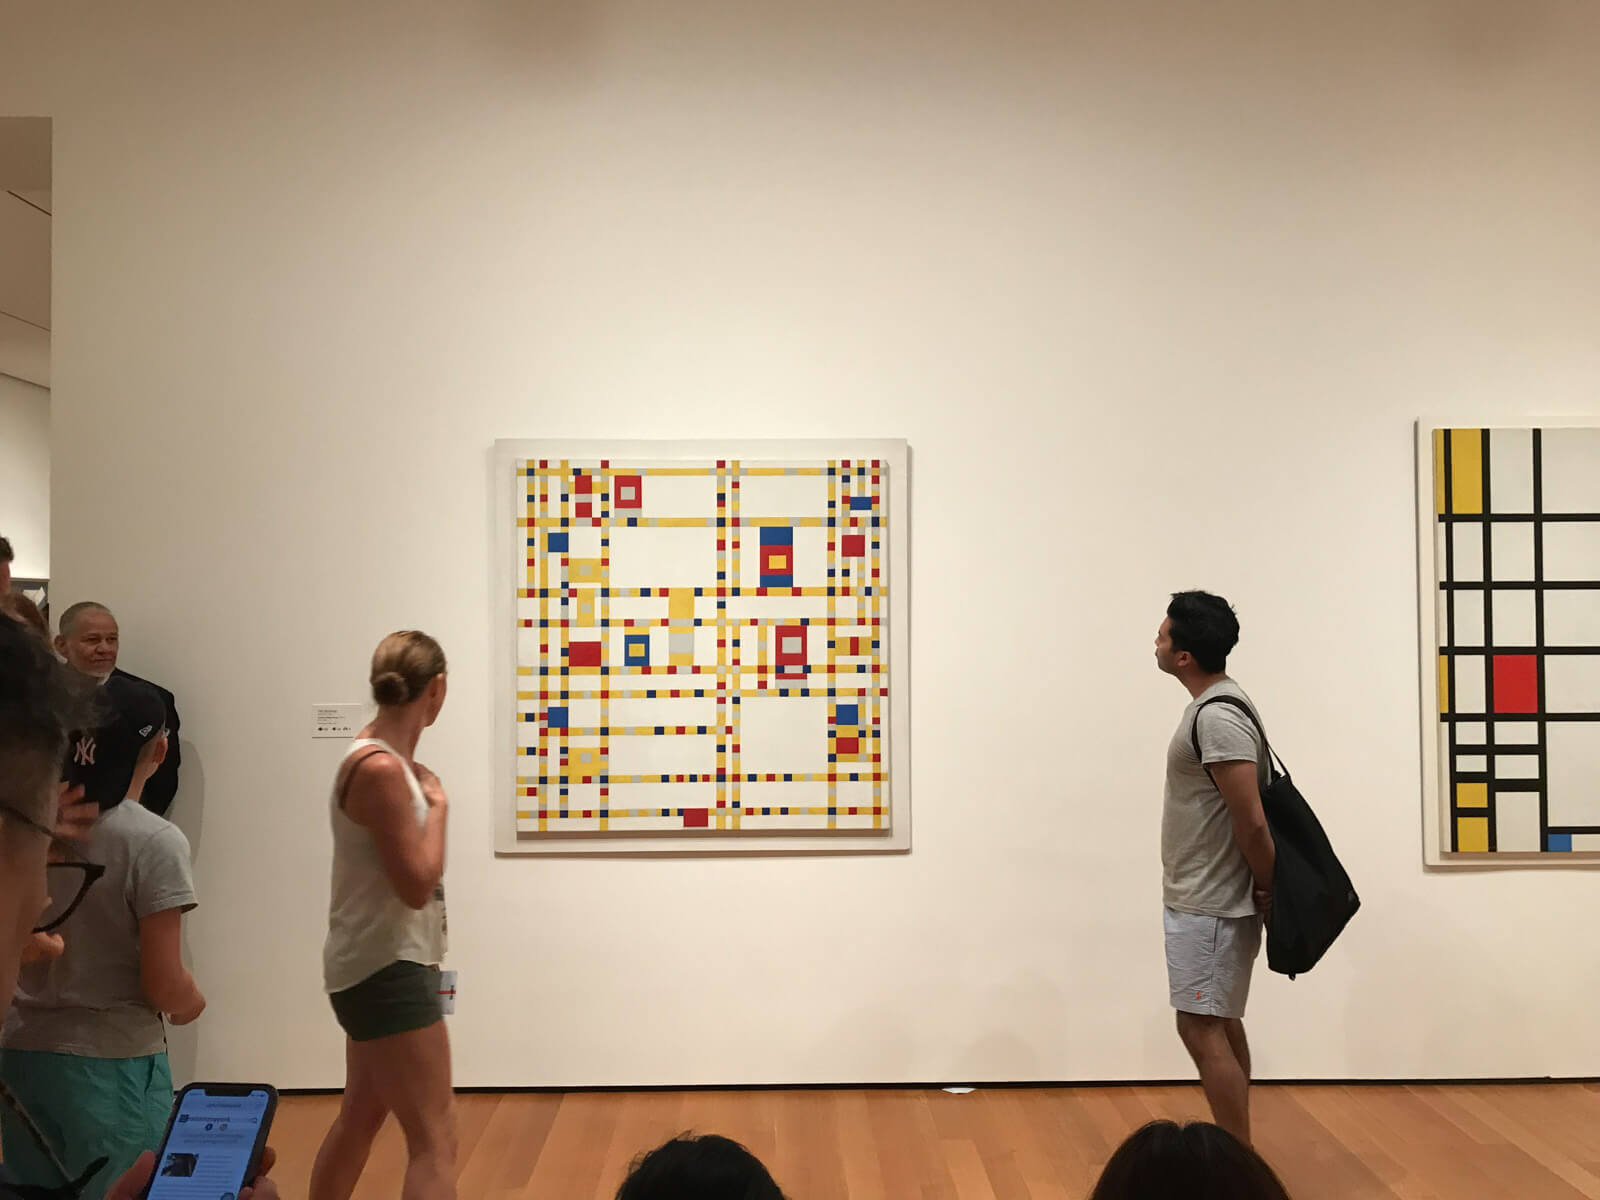 The inside of an art gallery with a geometric-style artwork of a Mondrian grid on the wall. Some people can be seen looking at it from the sides